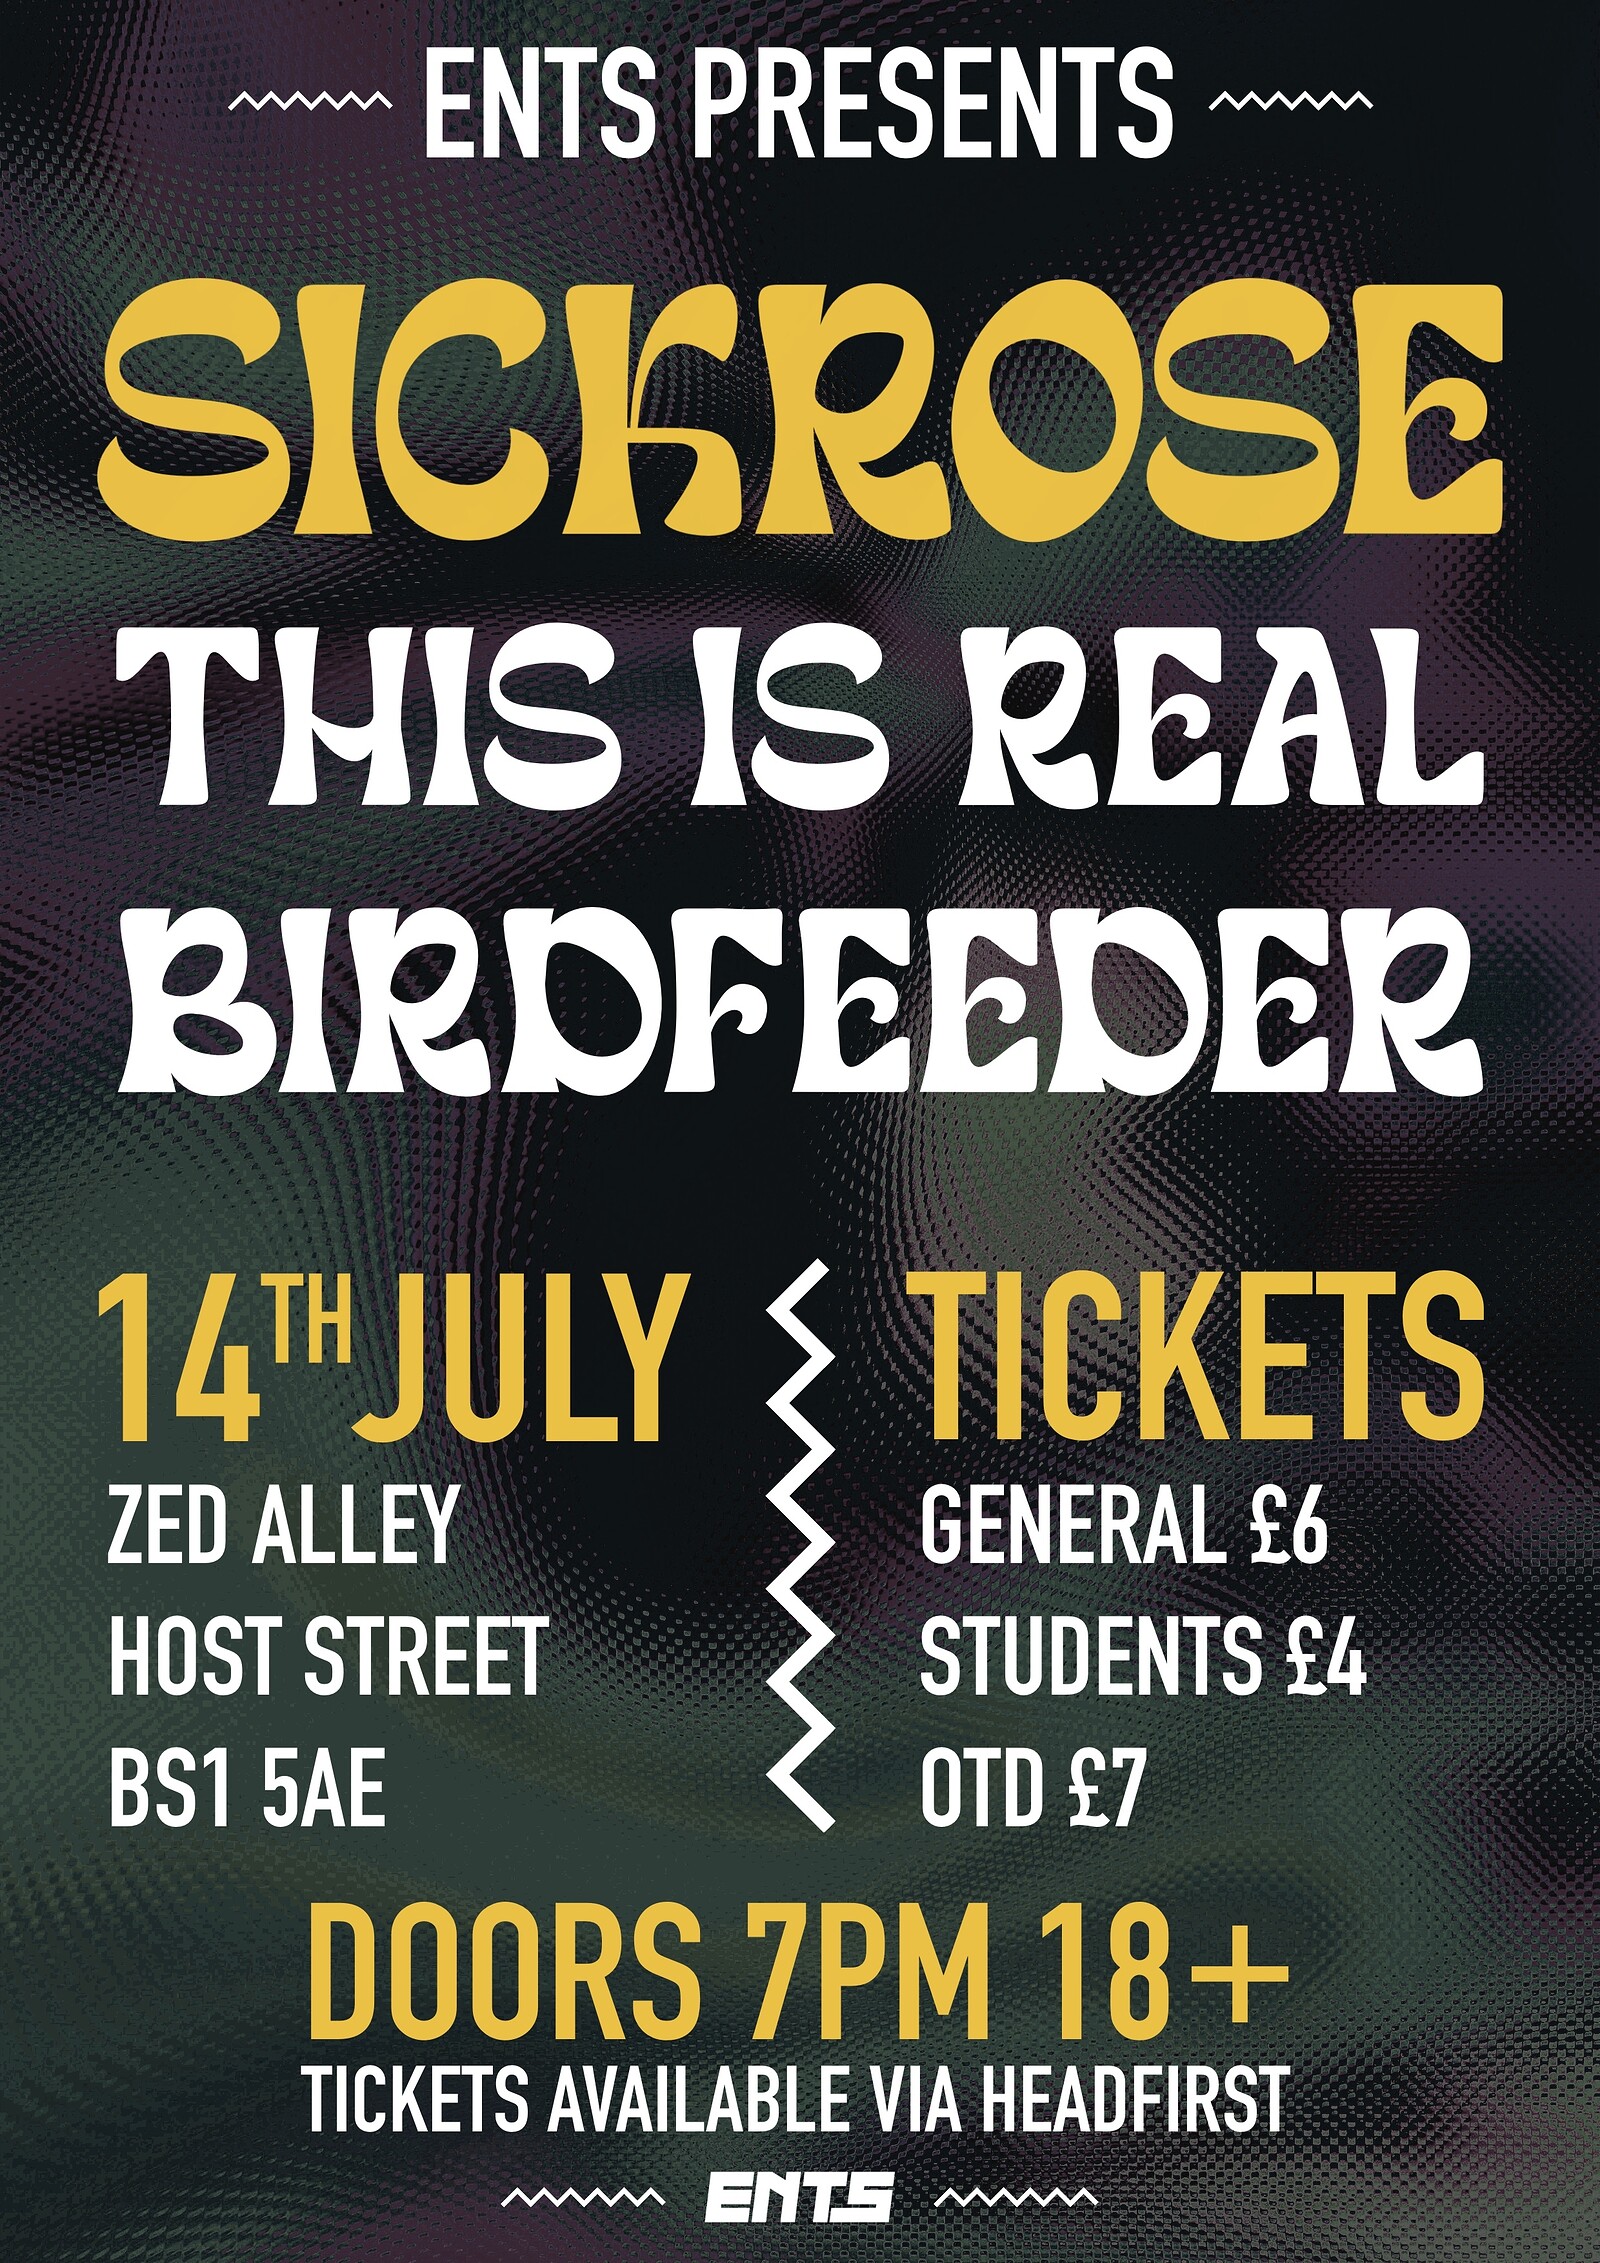 Sickrose w/ This Is Real & Birdfeeder at Zed Alley